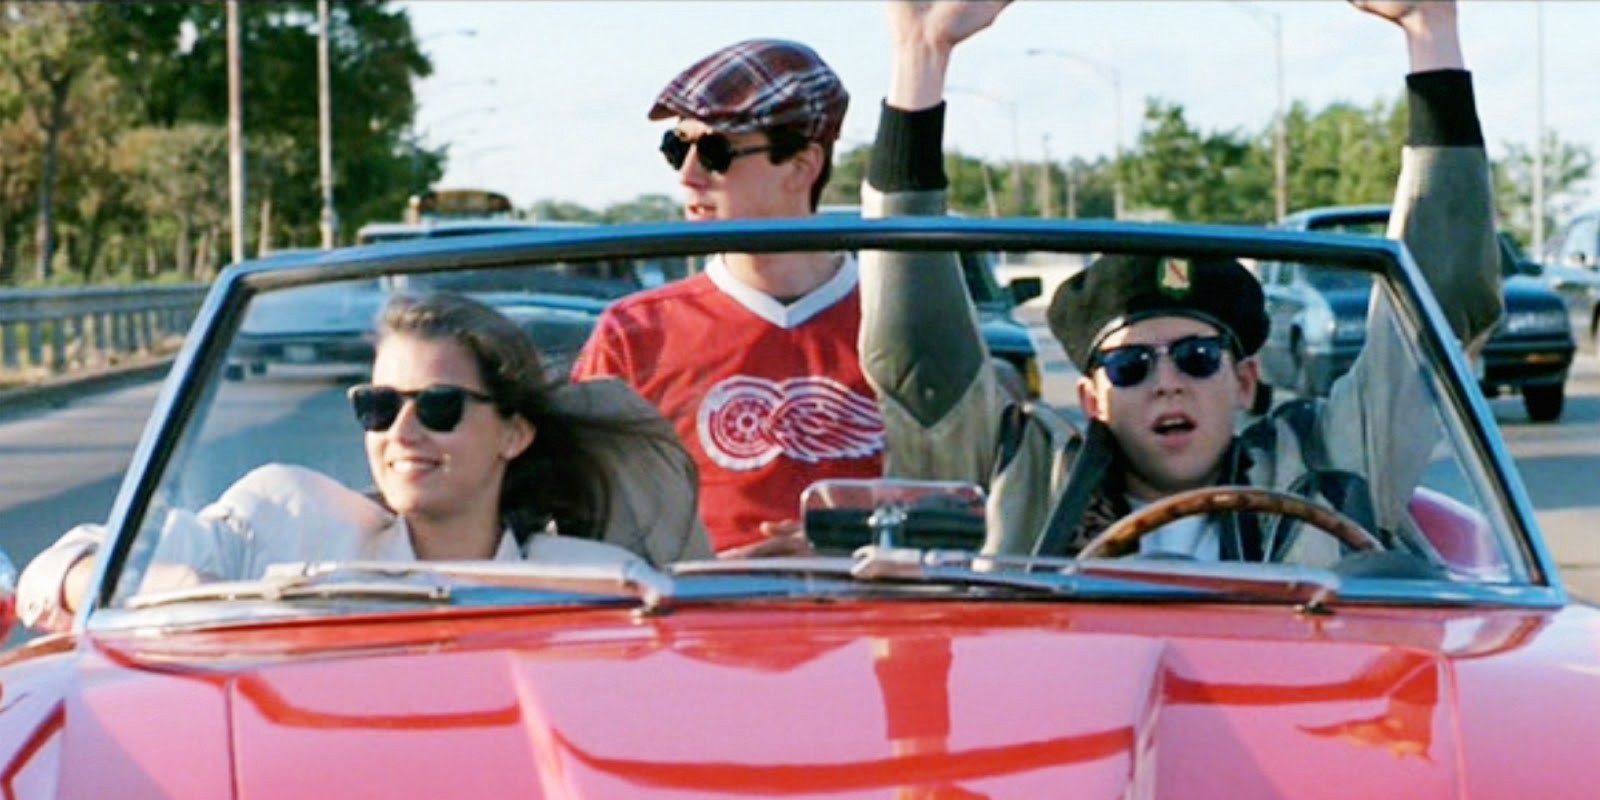 Ferris, Cameron, and Sloane riding together in the car in Ferris Bueller's Day Off